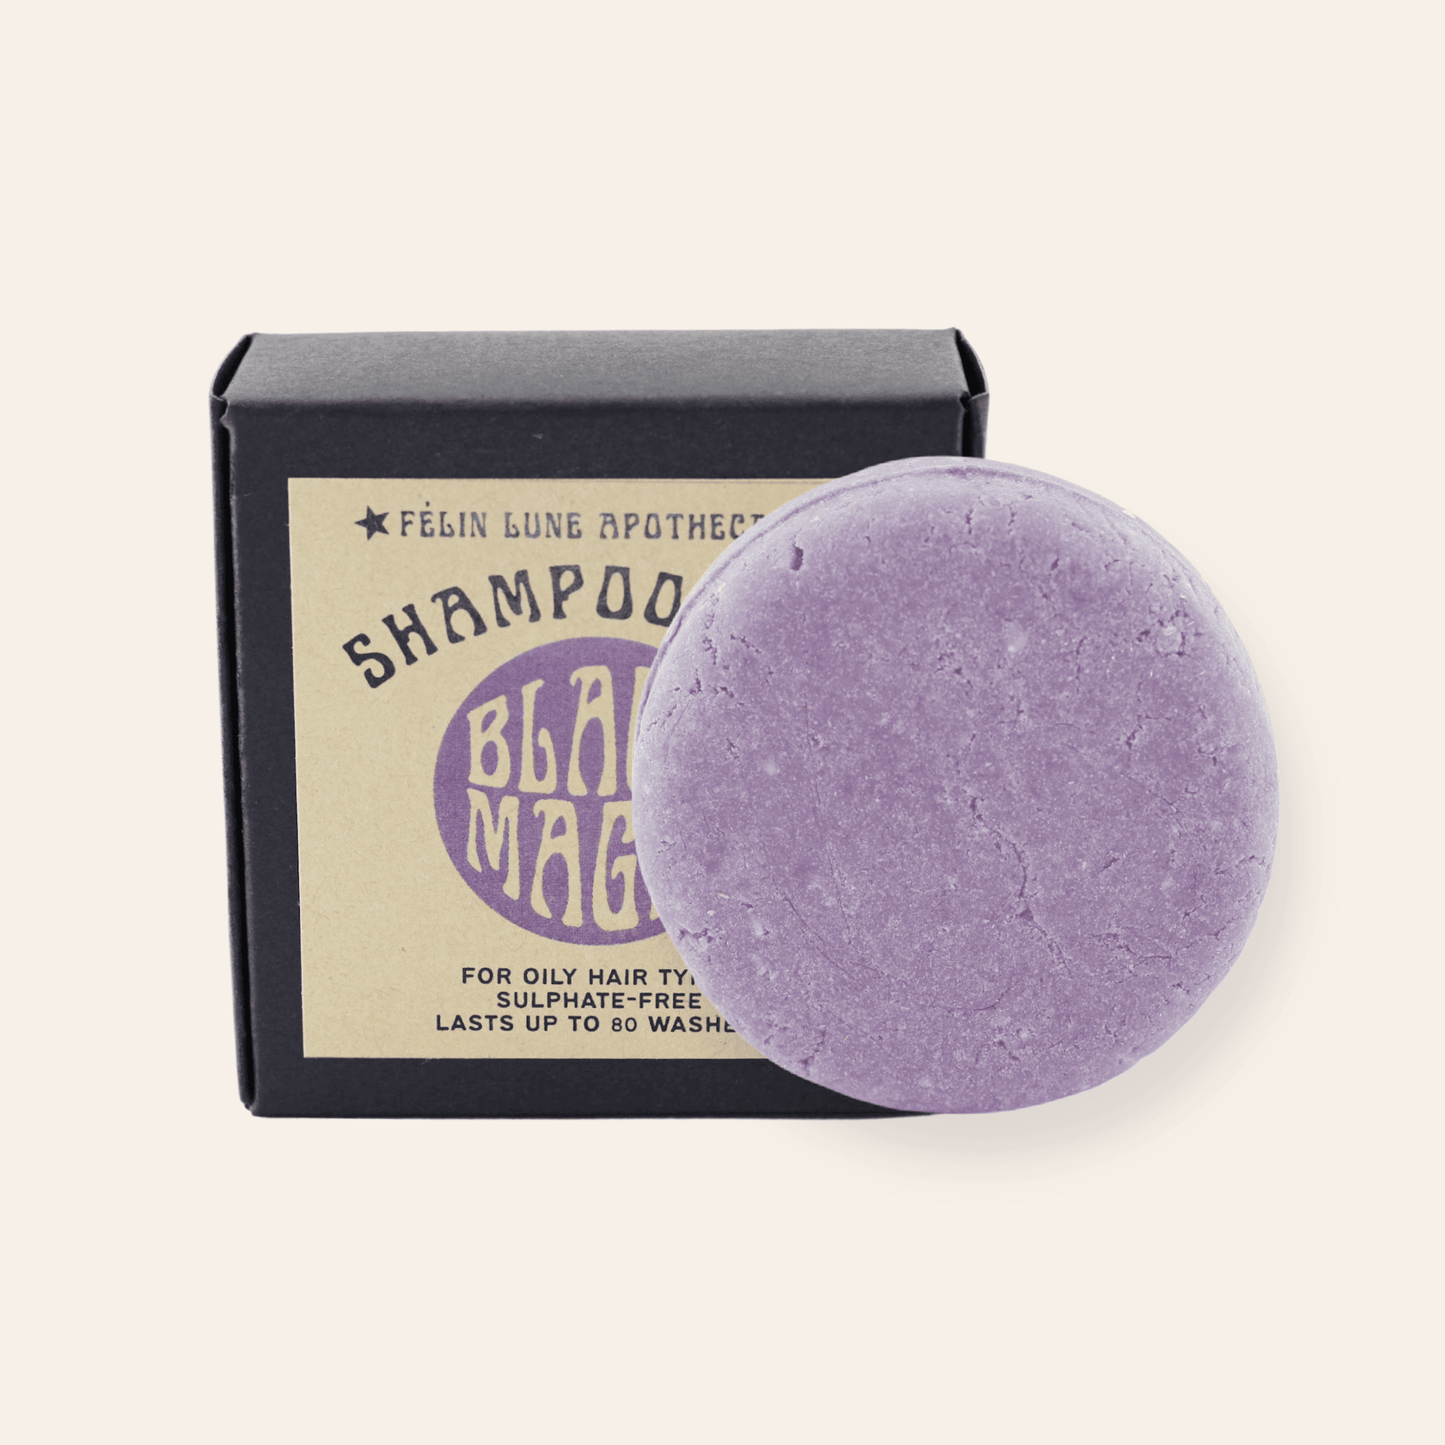 A round purple shampoo bar set in front of a black box and kraft label.